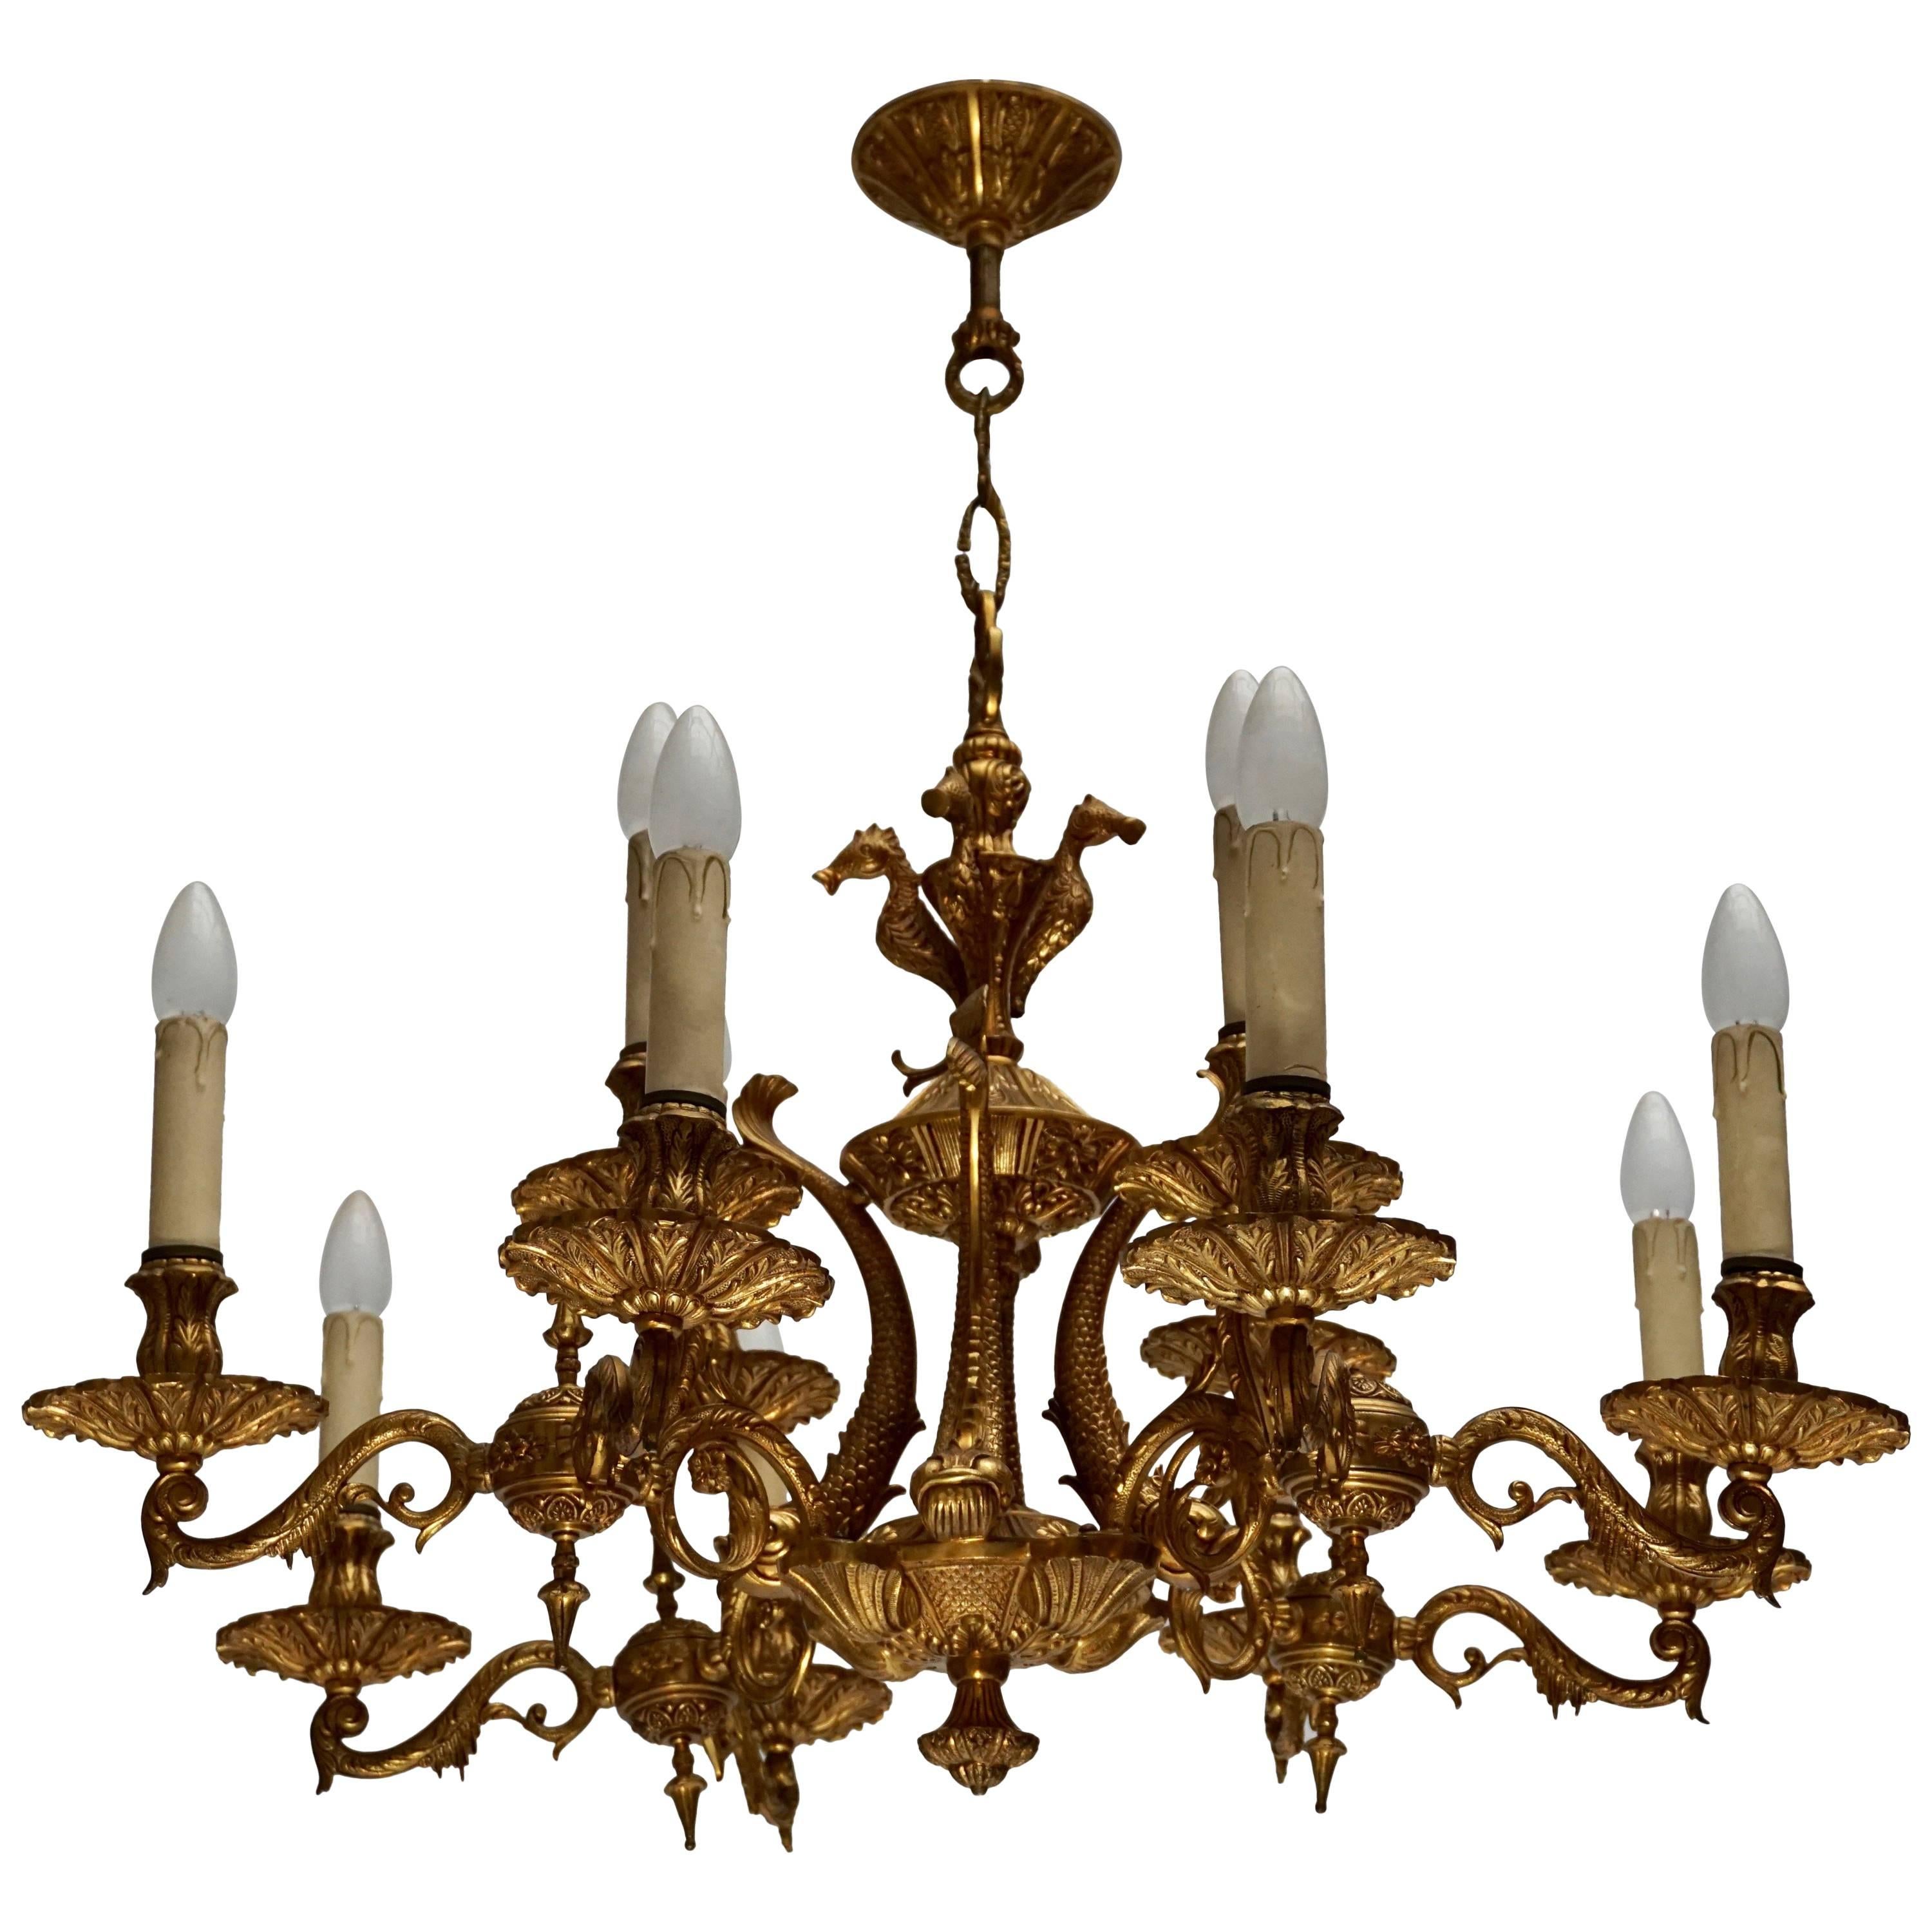 Beautiful and Elegant Solid Bronze Chandelier with Fishes in the Centre